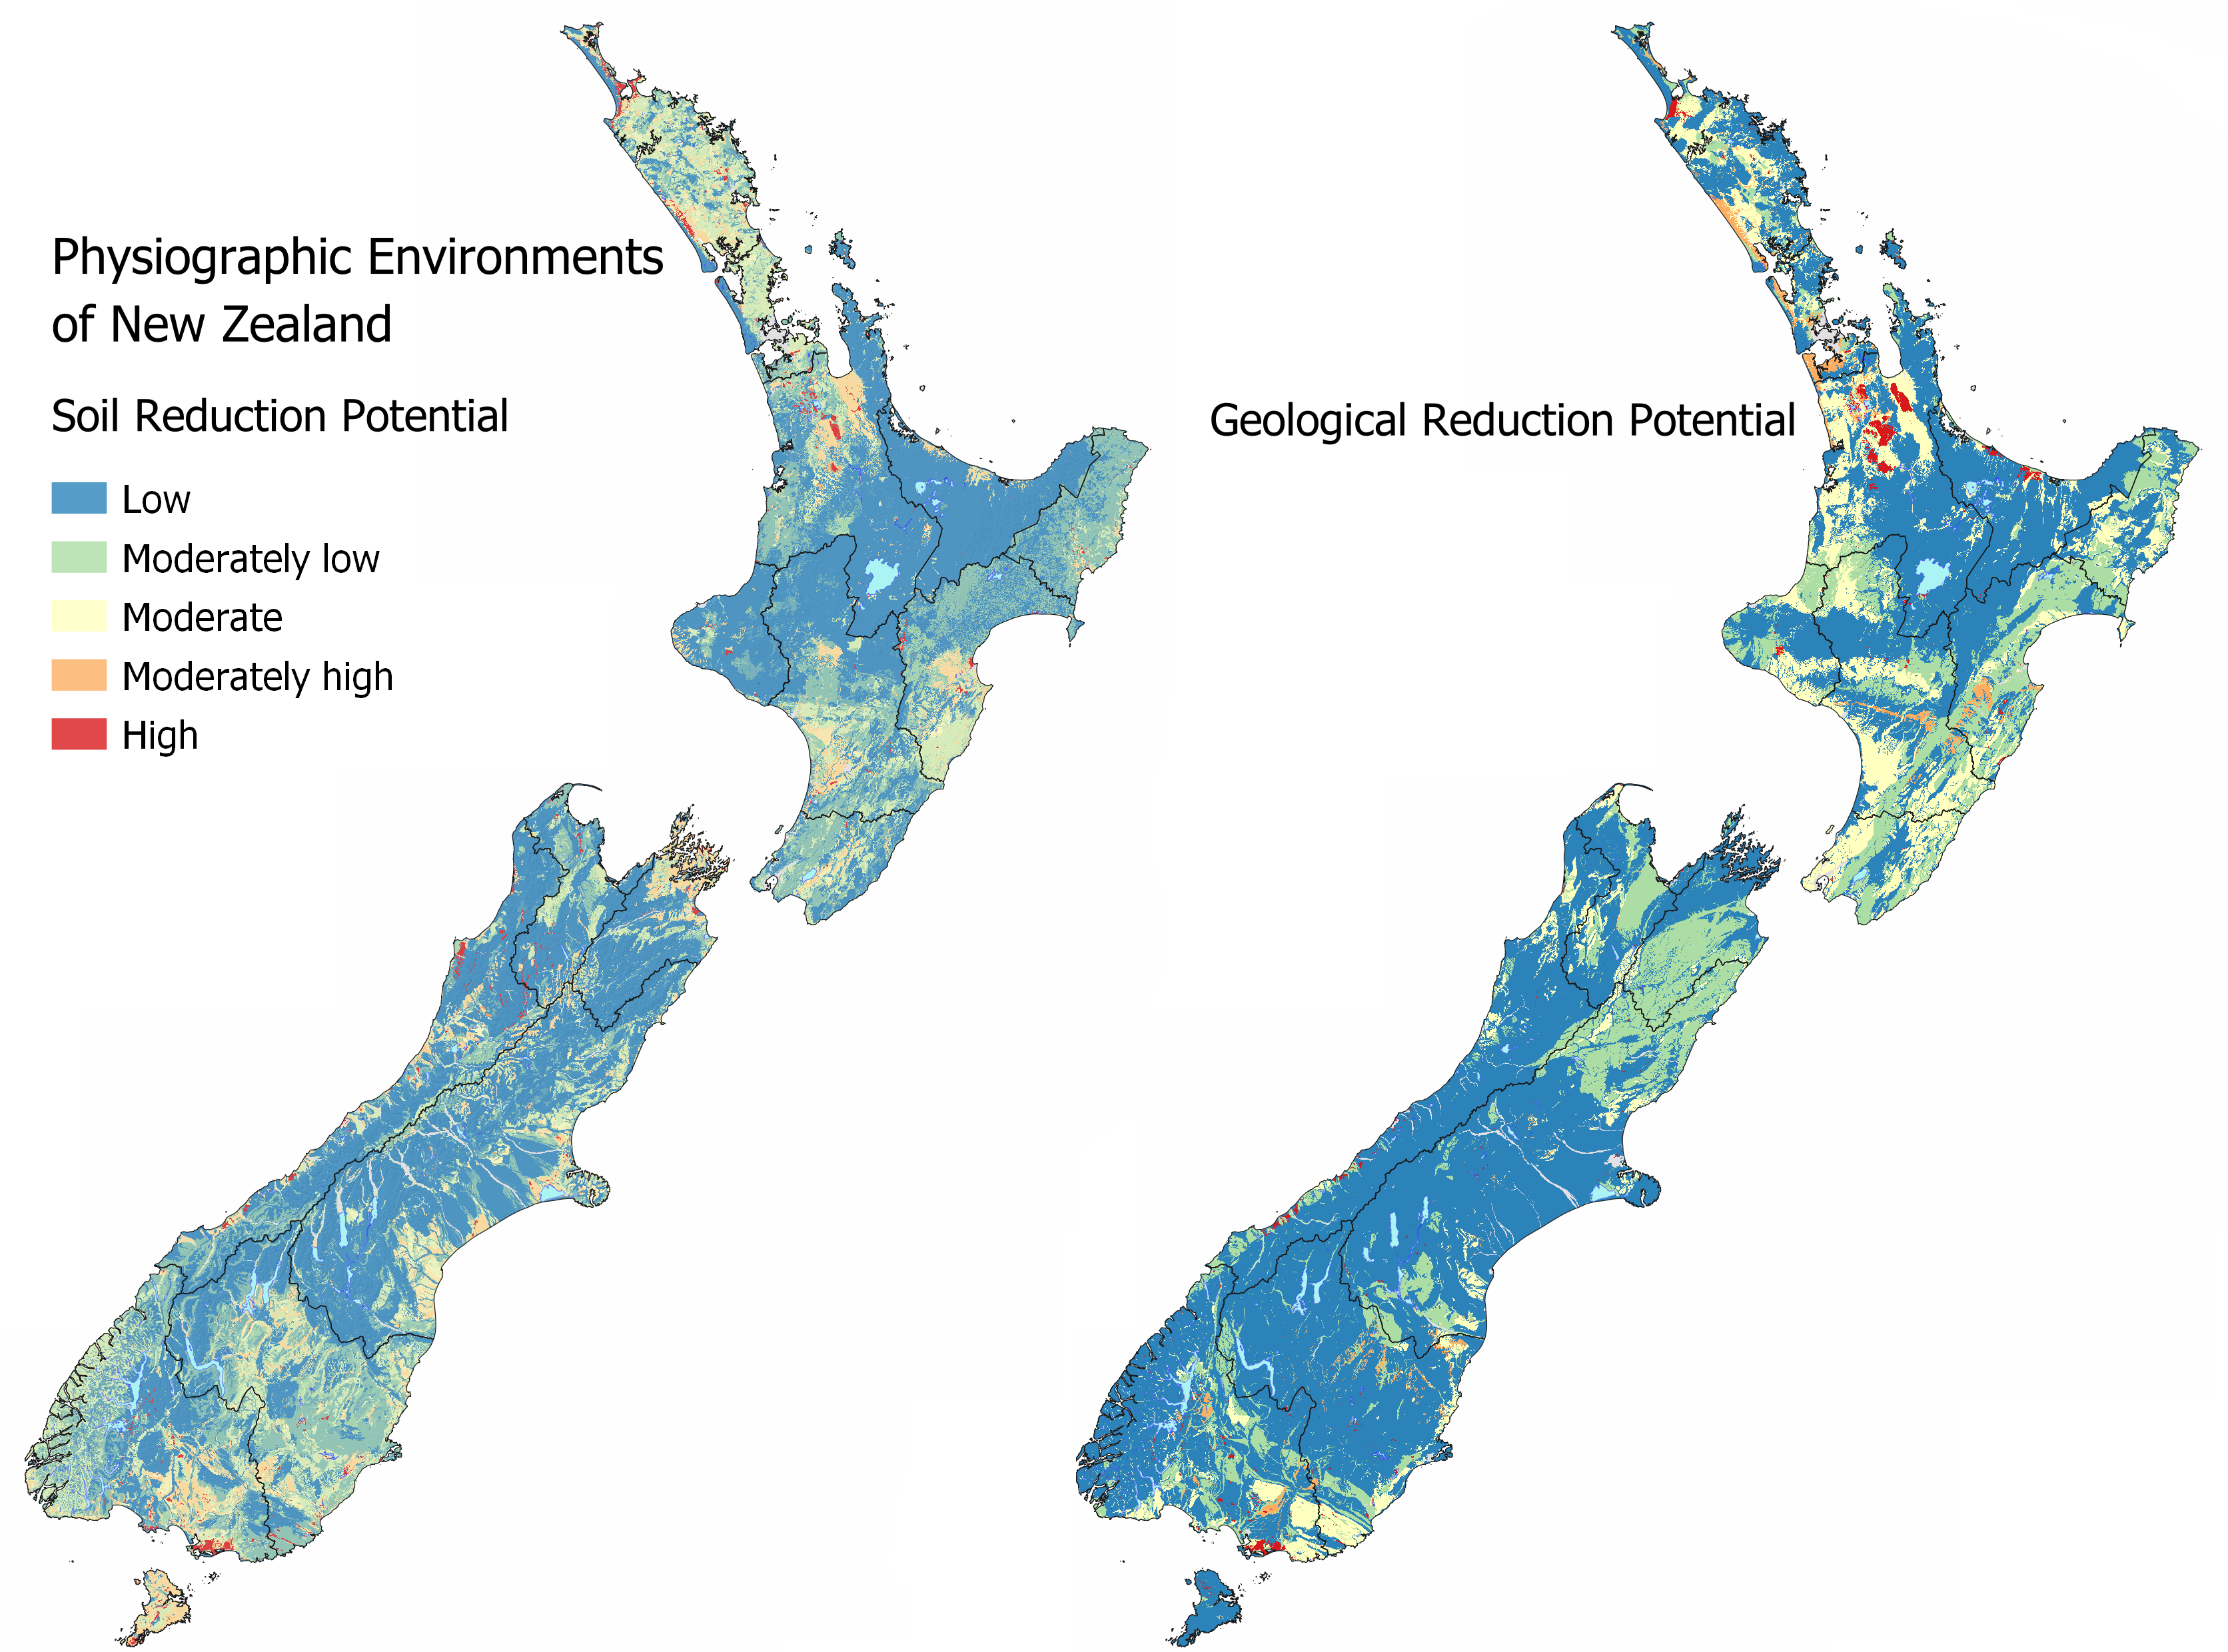 Two colour-coded maps of New Zealand showing Soil Reduction Poteintial and Geological Reduction Potential from Low to High.